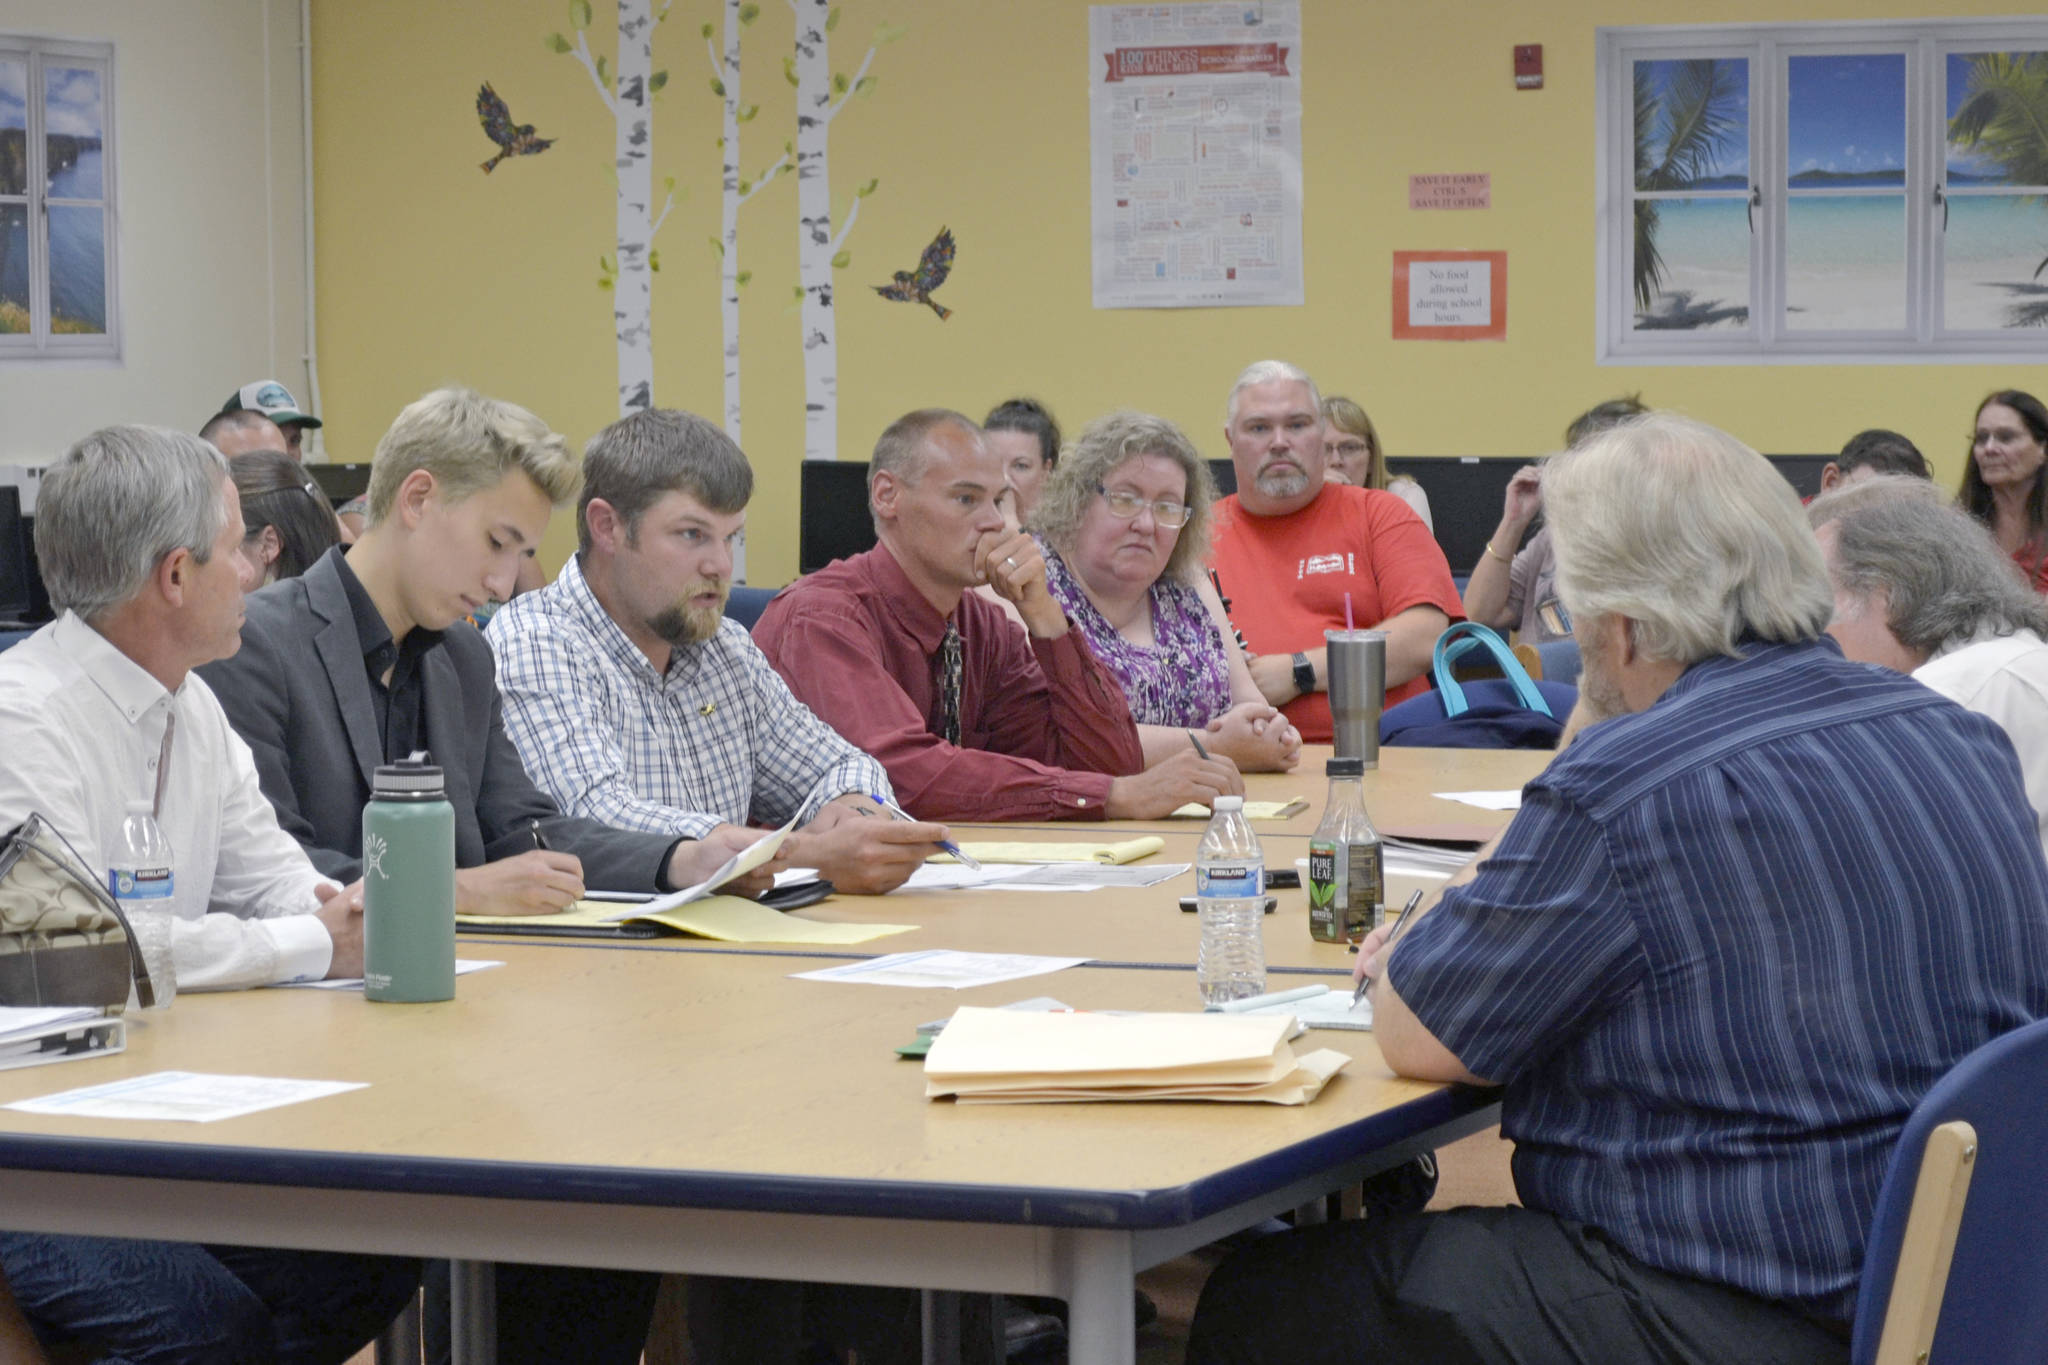 The Kenai Peninsula Borough School District and two employee associations — The Kenai Peninsula Borough Education Association and the Kenai Peninsula Borough Education Support Association — negotiate for a new contract on Tuesday, Aug. 13, 2019, at the Soldotna High School Library, in Soldotna, Alaska. (Photo by Victoria Petersen/Peninsula Clarion)